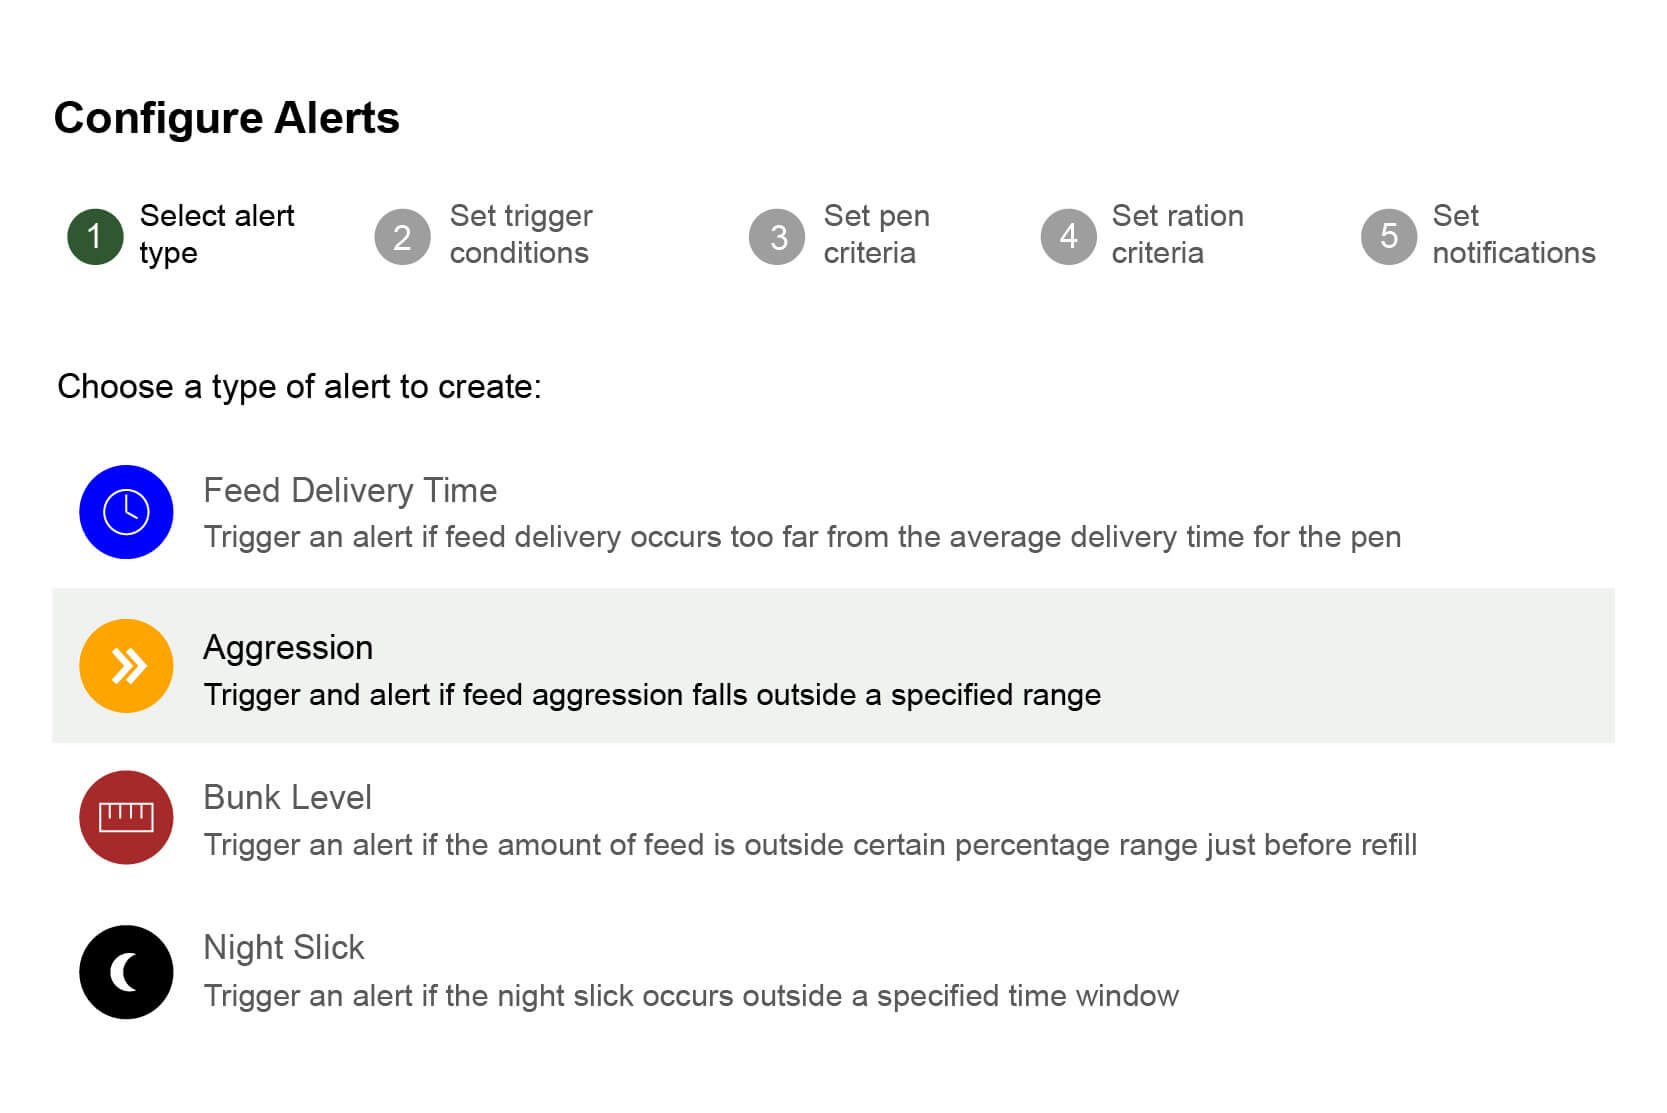 Screenshot of the setup screen for the bunk management alert system asking th user to select the type of alert they would like to create.